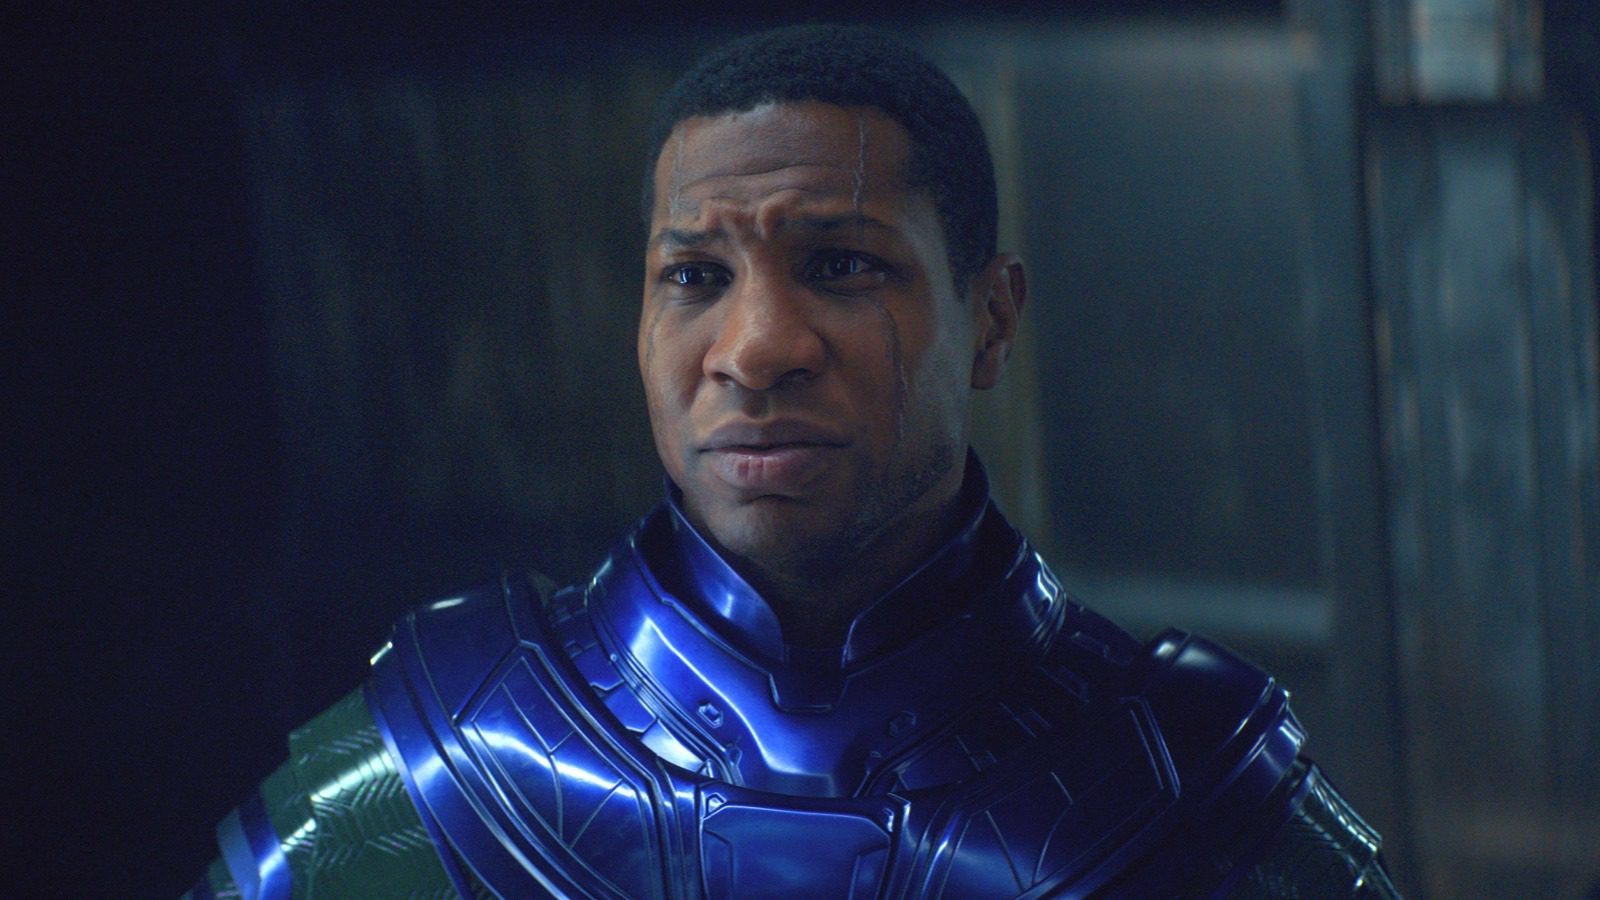 Jonathan Majors' Arrest - What This Could Mean For Kang's Future In The MCU